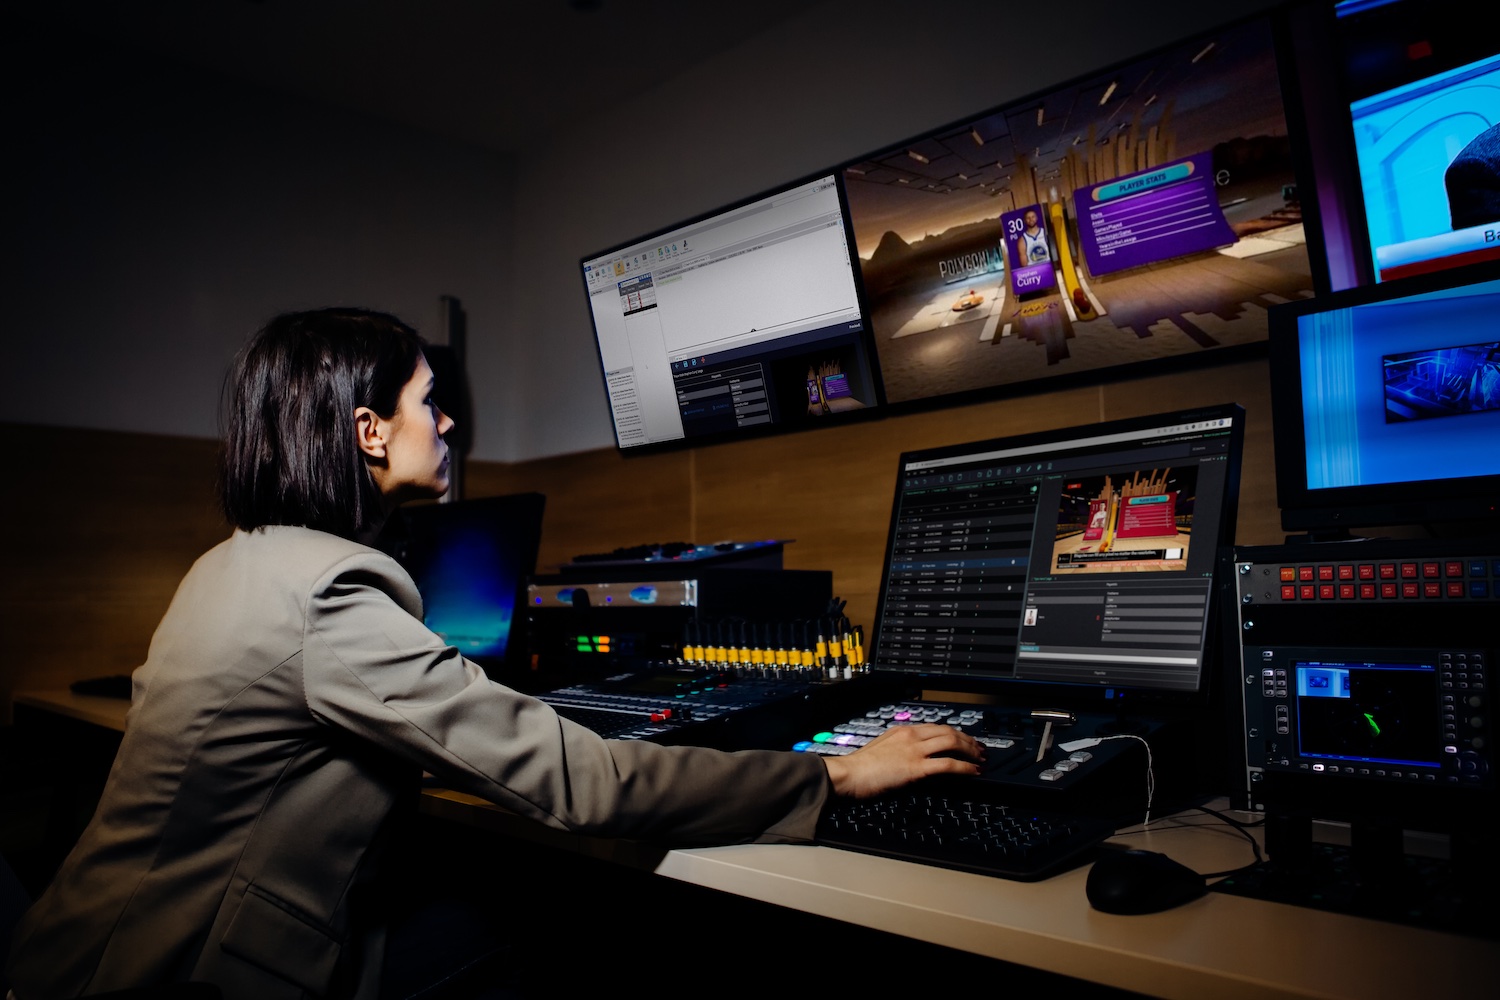 disguise upgrades all-in-one broadcast platform, opening the gateway to Unreal Engine graphics for all